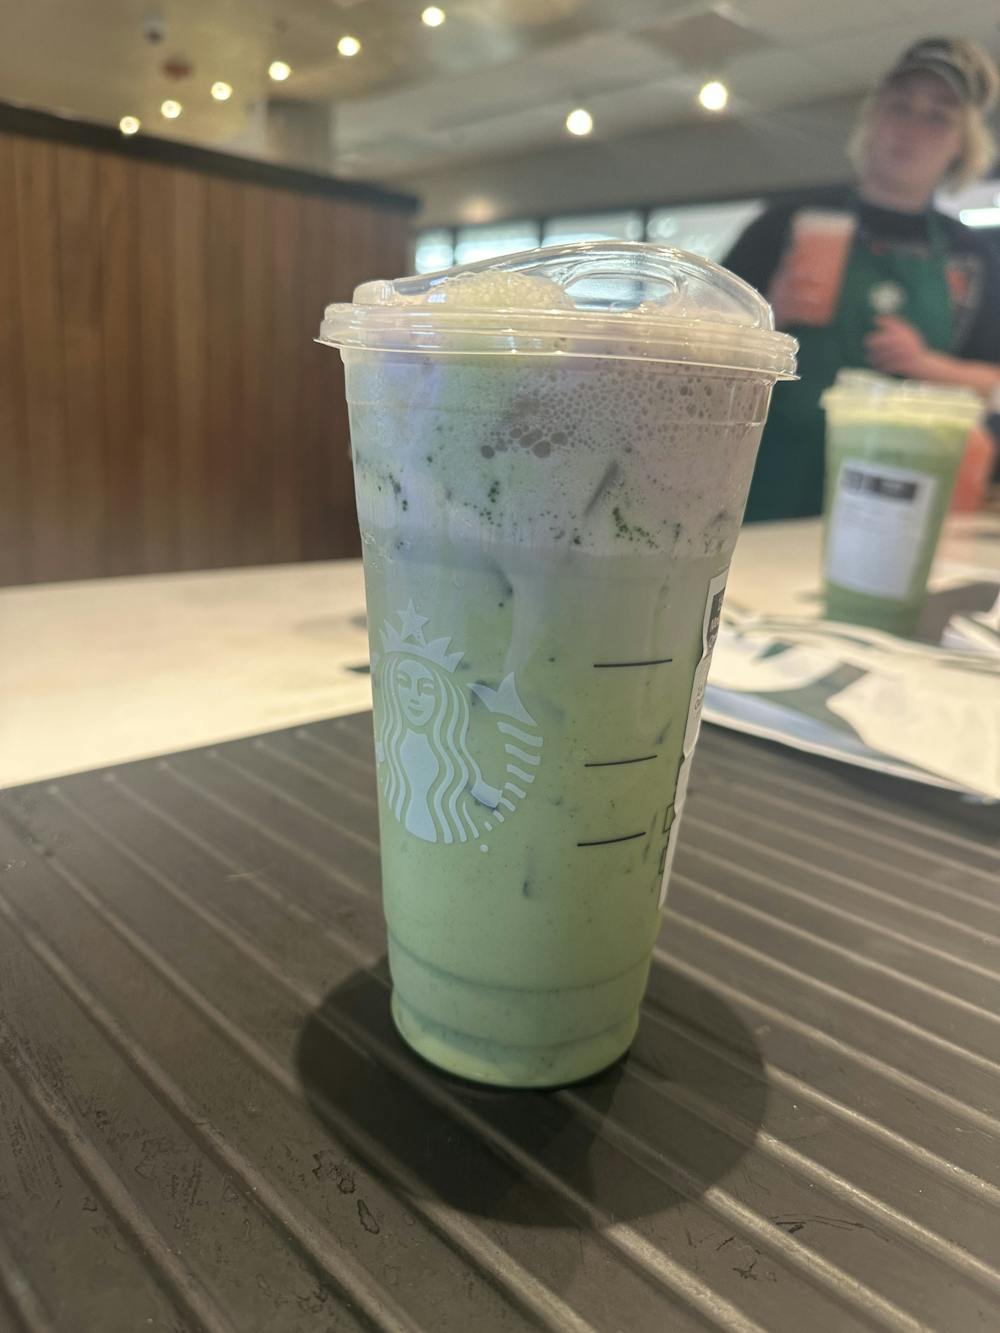 Featured is Starbucks' Iced Matcha Latte, which is topped with the new lavender cold foam, the only one of the new lavender drinks that is purple.